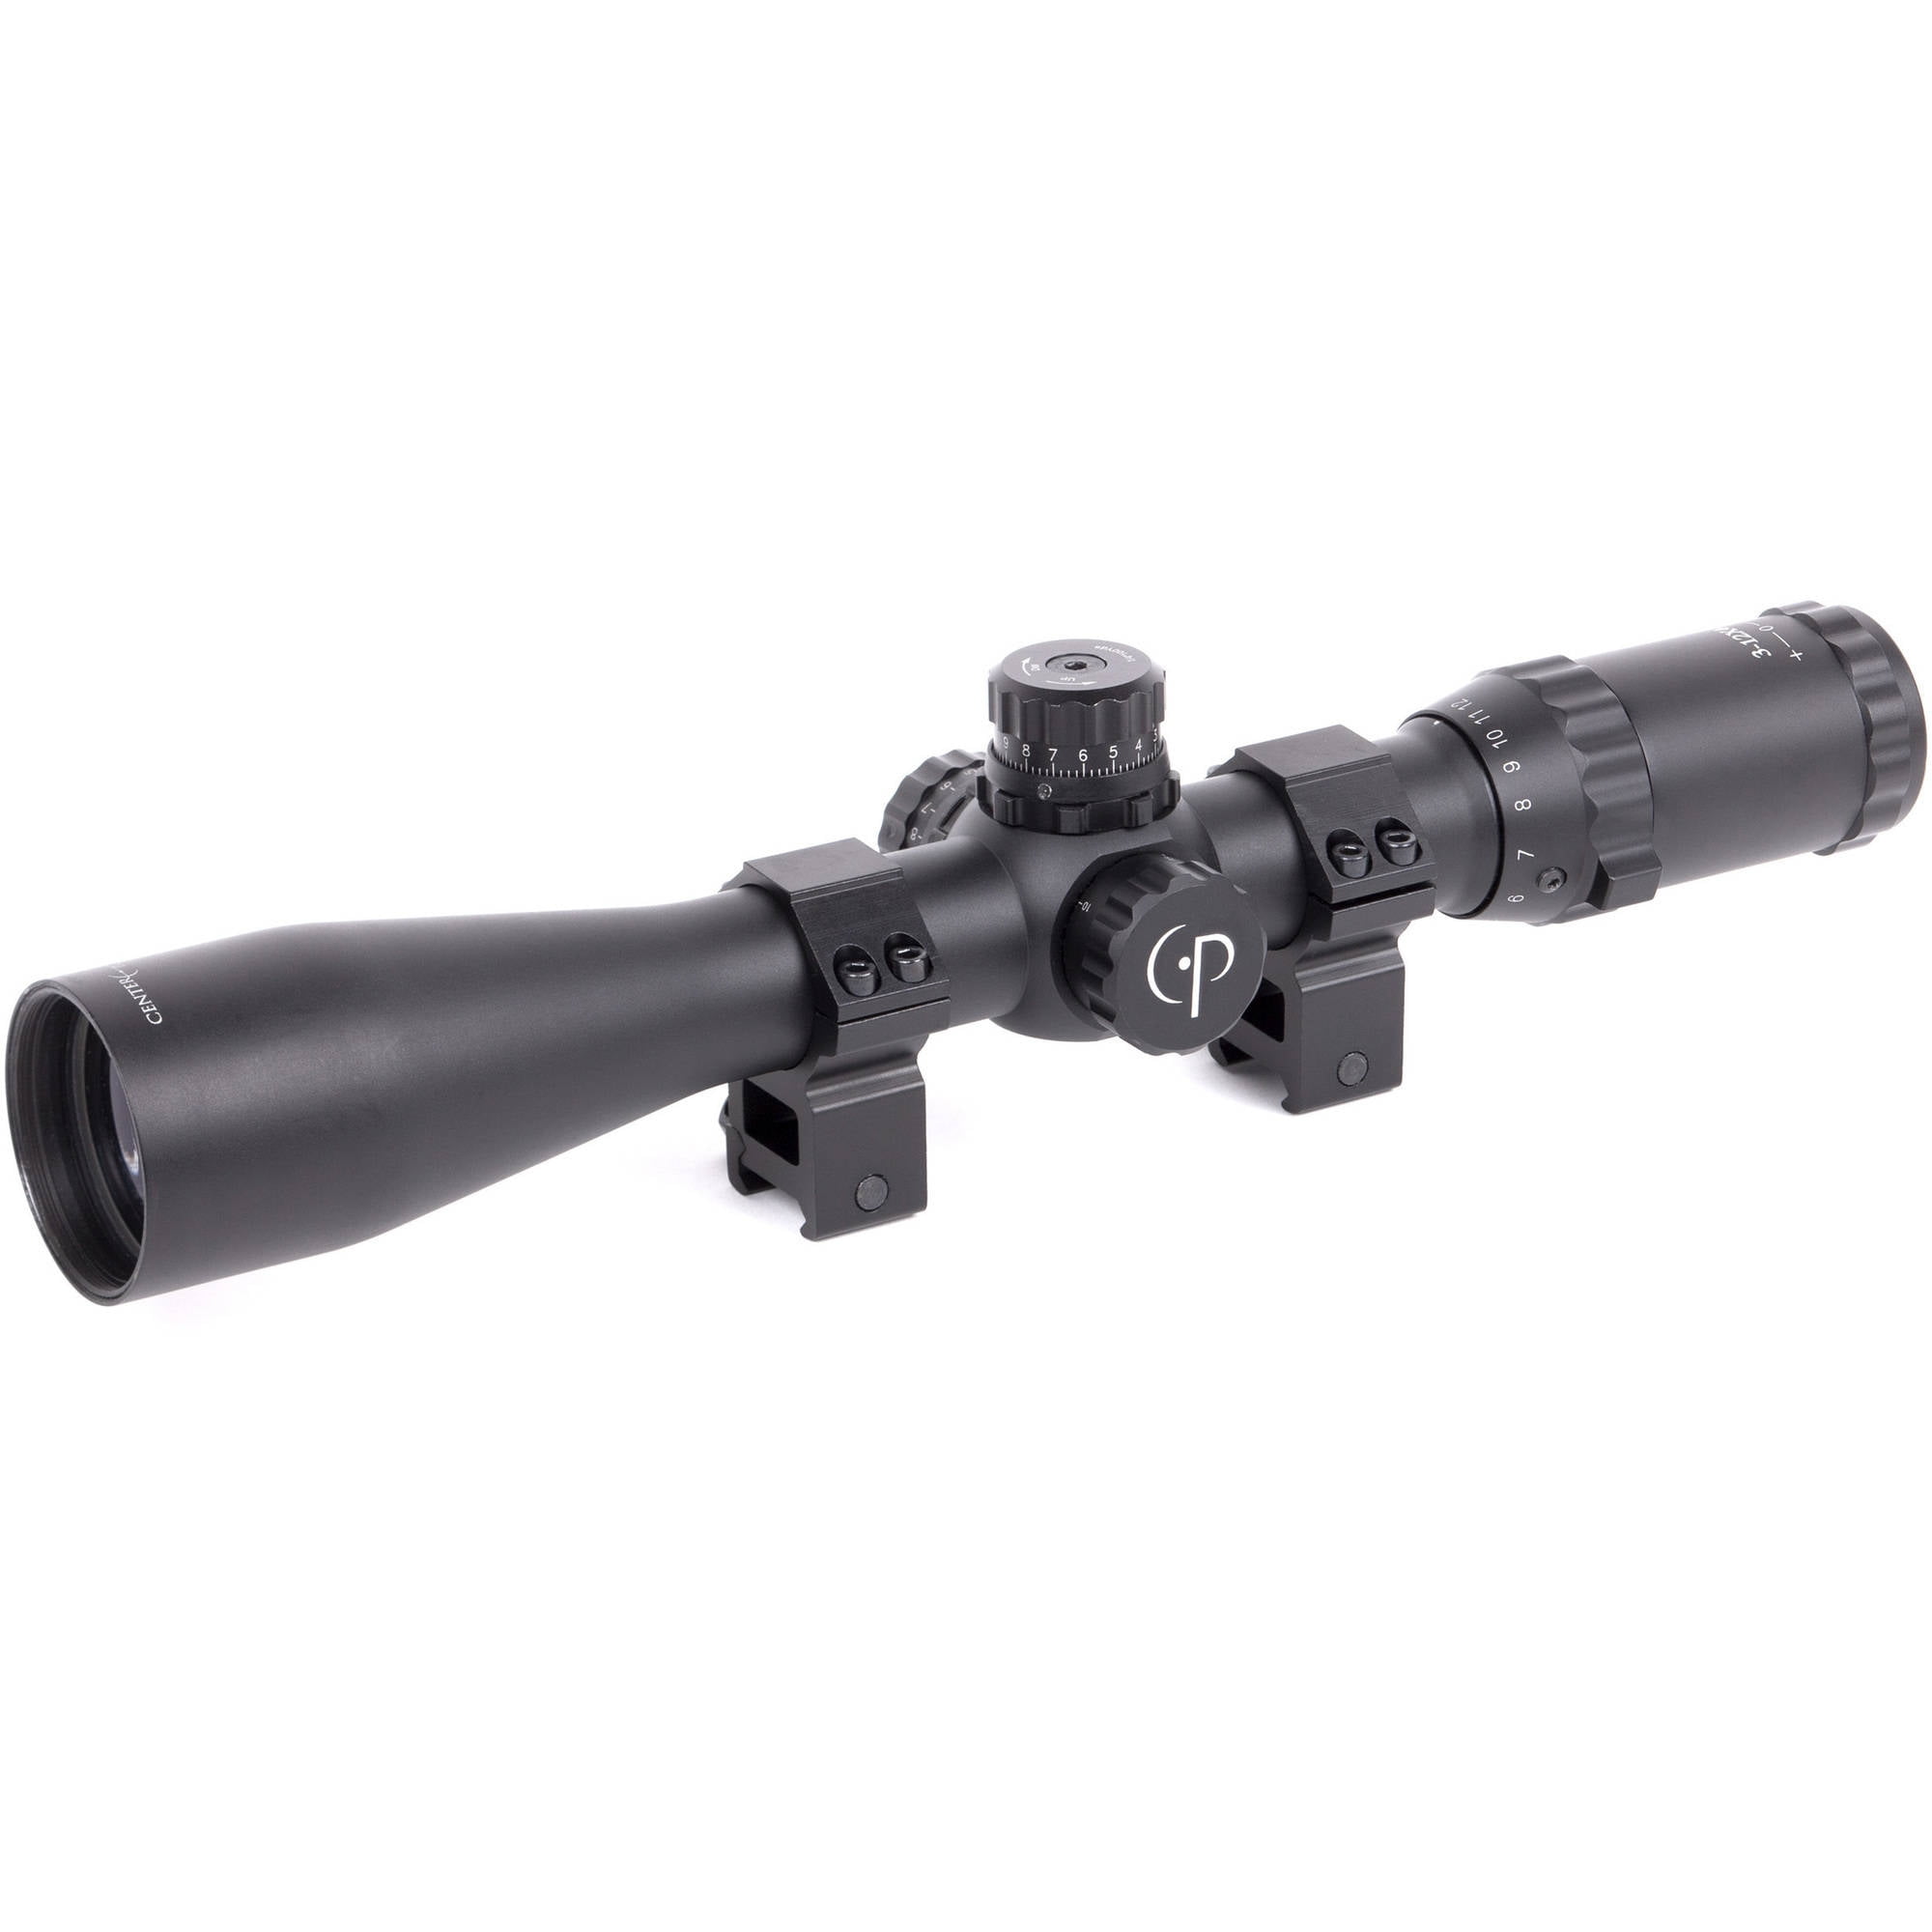 Hatsan Optima 3-9X40AO Fully Multi-Coated Water-Proof Airrifle Scope with Rings 